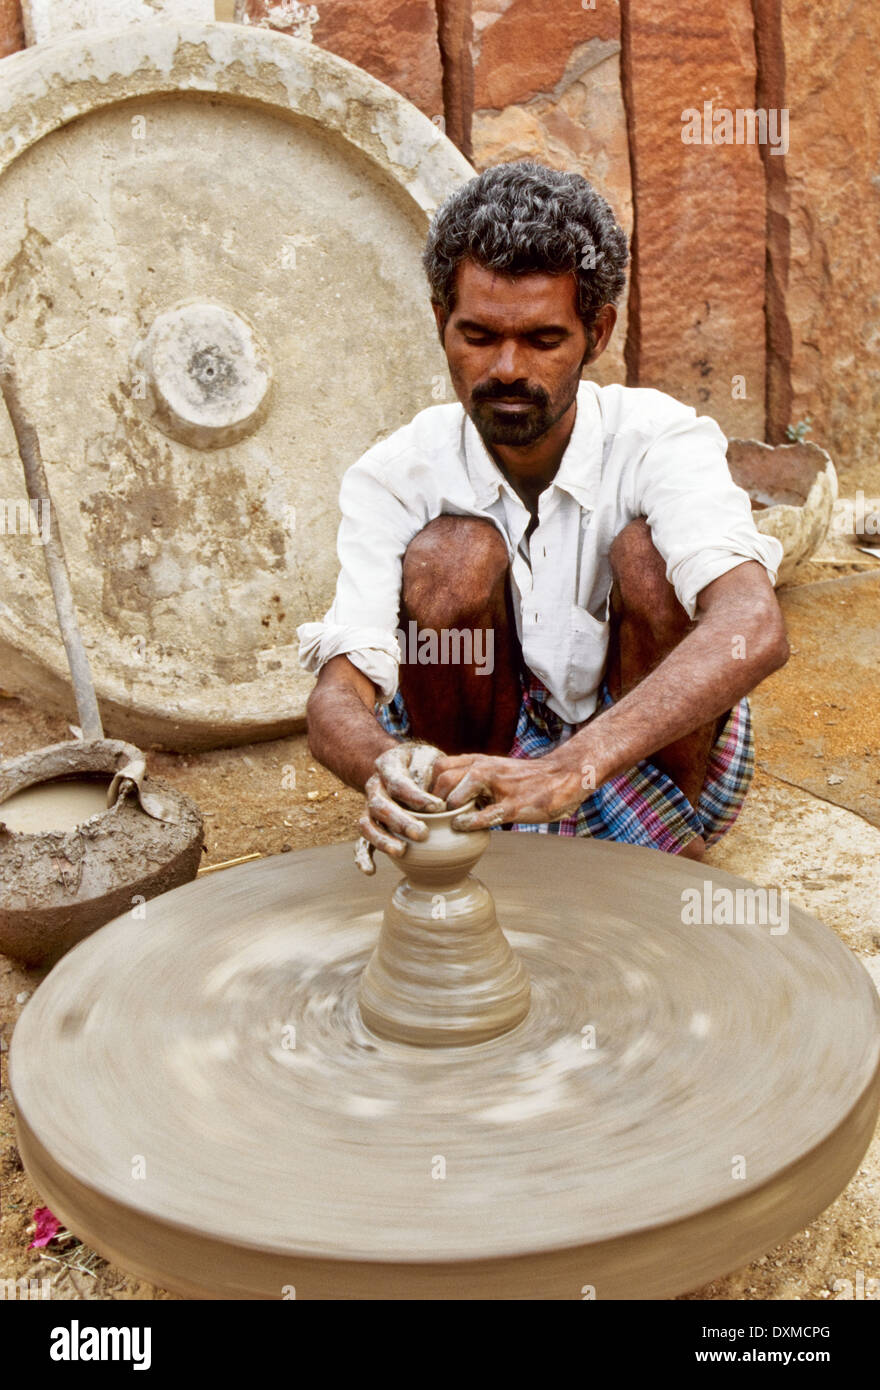 Male Indian potter throwing a pot on a wheel in rural Rajasthan, India Stock Photo